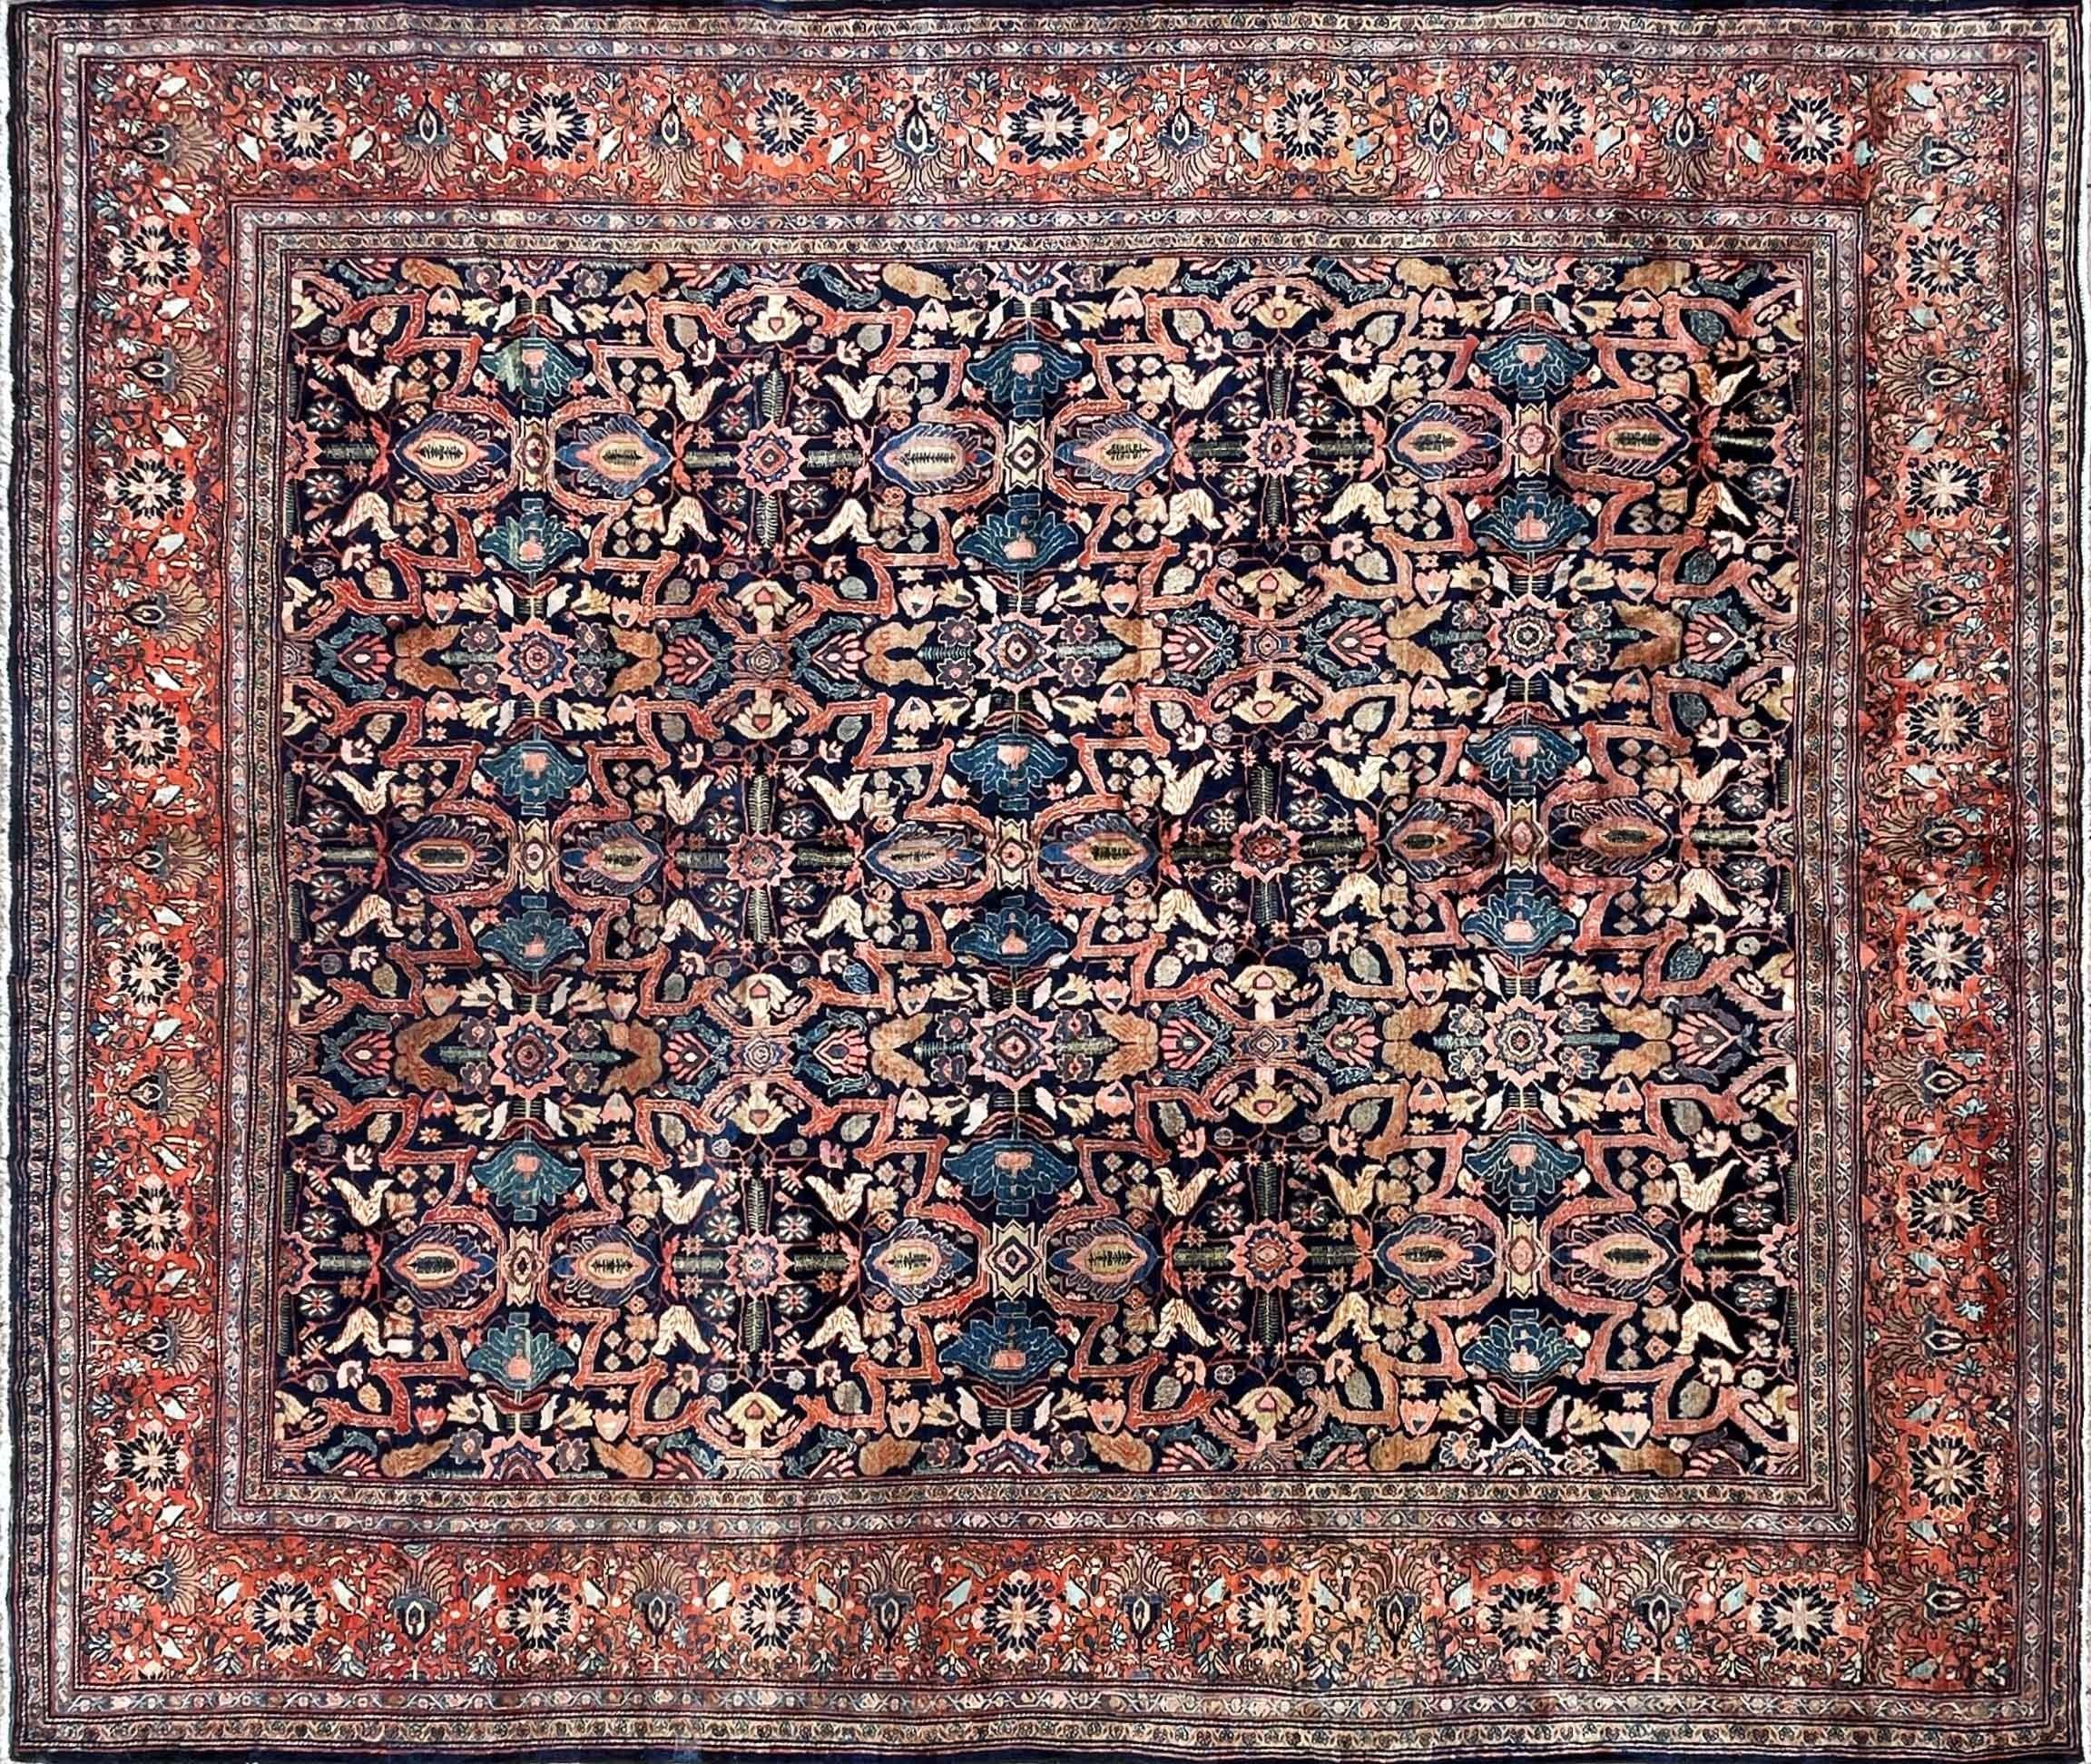 Introducing the exquisite Sarouk Feraghan, a timeless rug dating back to the late 1880s and remarkably preserved in excellent condition.

Woven in and around the picturesque region of Arak in northwest Iran, this rug boasts a captivating allover